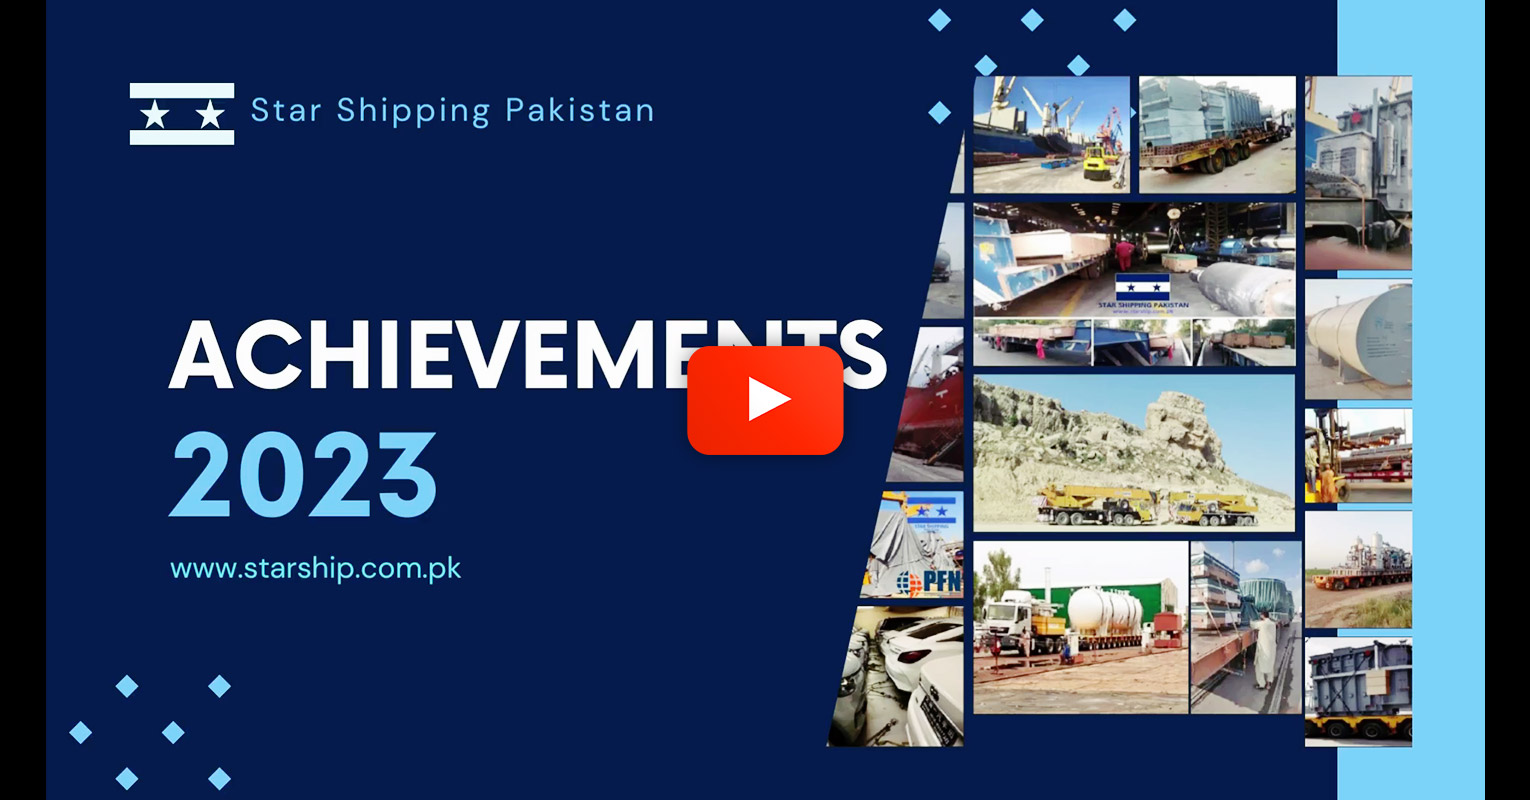 Video - Star Shipping Pakistan Shares their Achievements for 2023